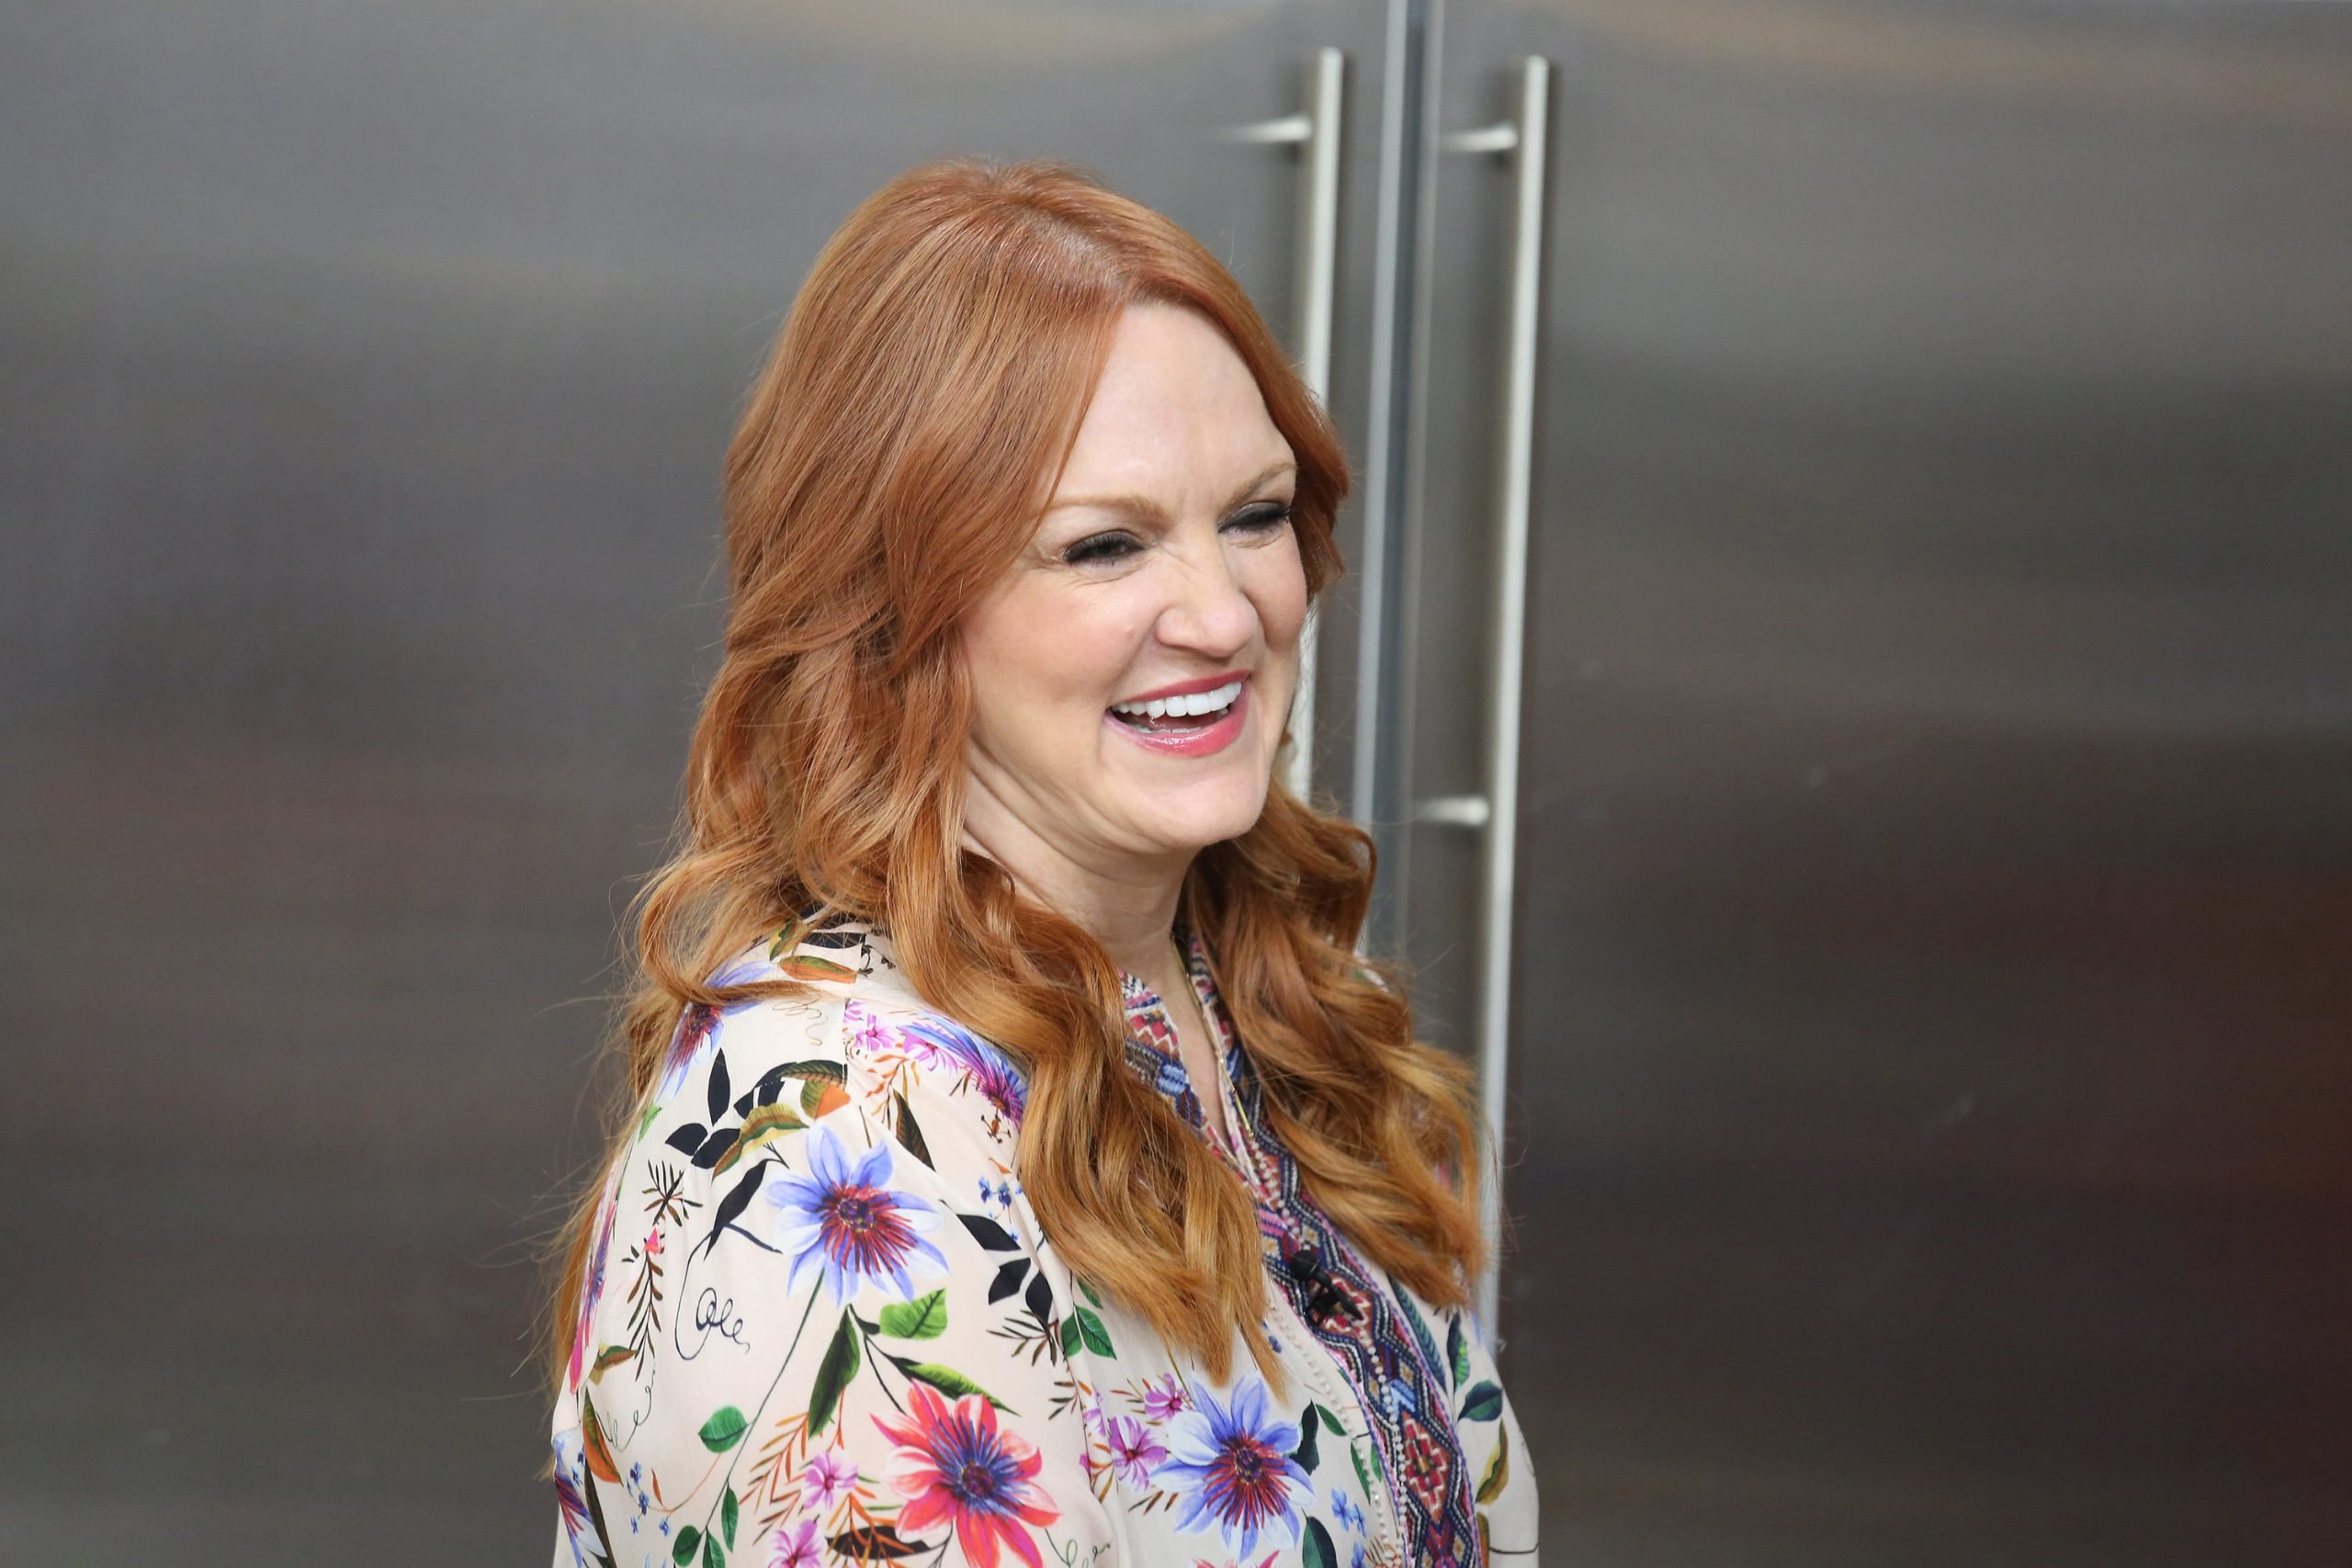 'The Pioneer Woman' Ree Drummond wears a print top and smiles at the camera.